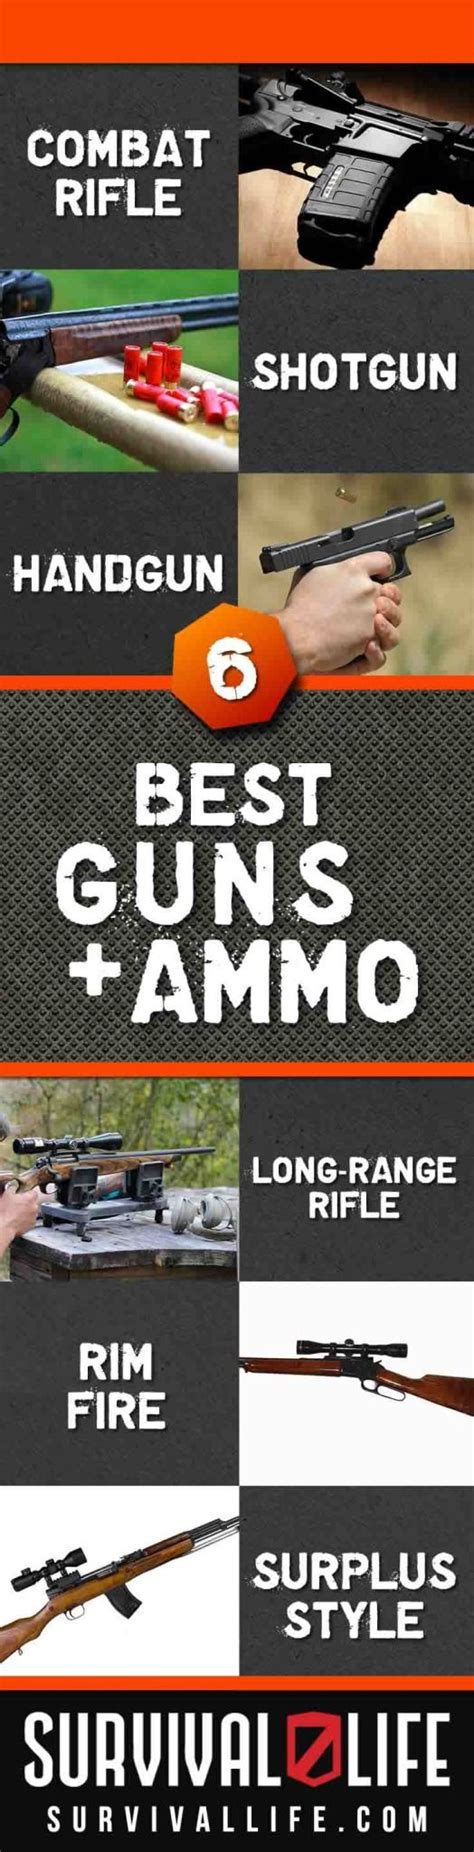 Choosing The Best Guns And Ammo Best Choices For Firearms And